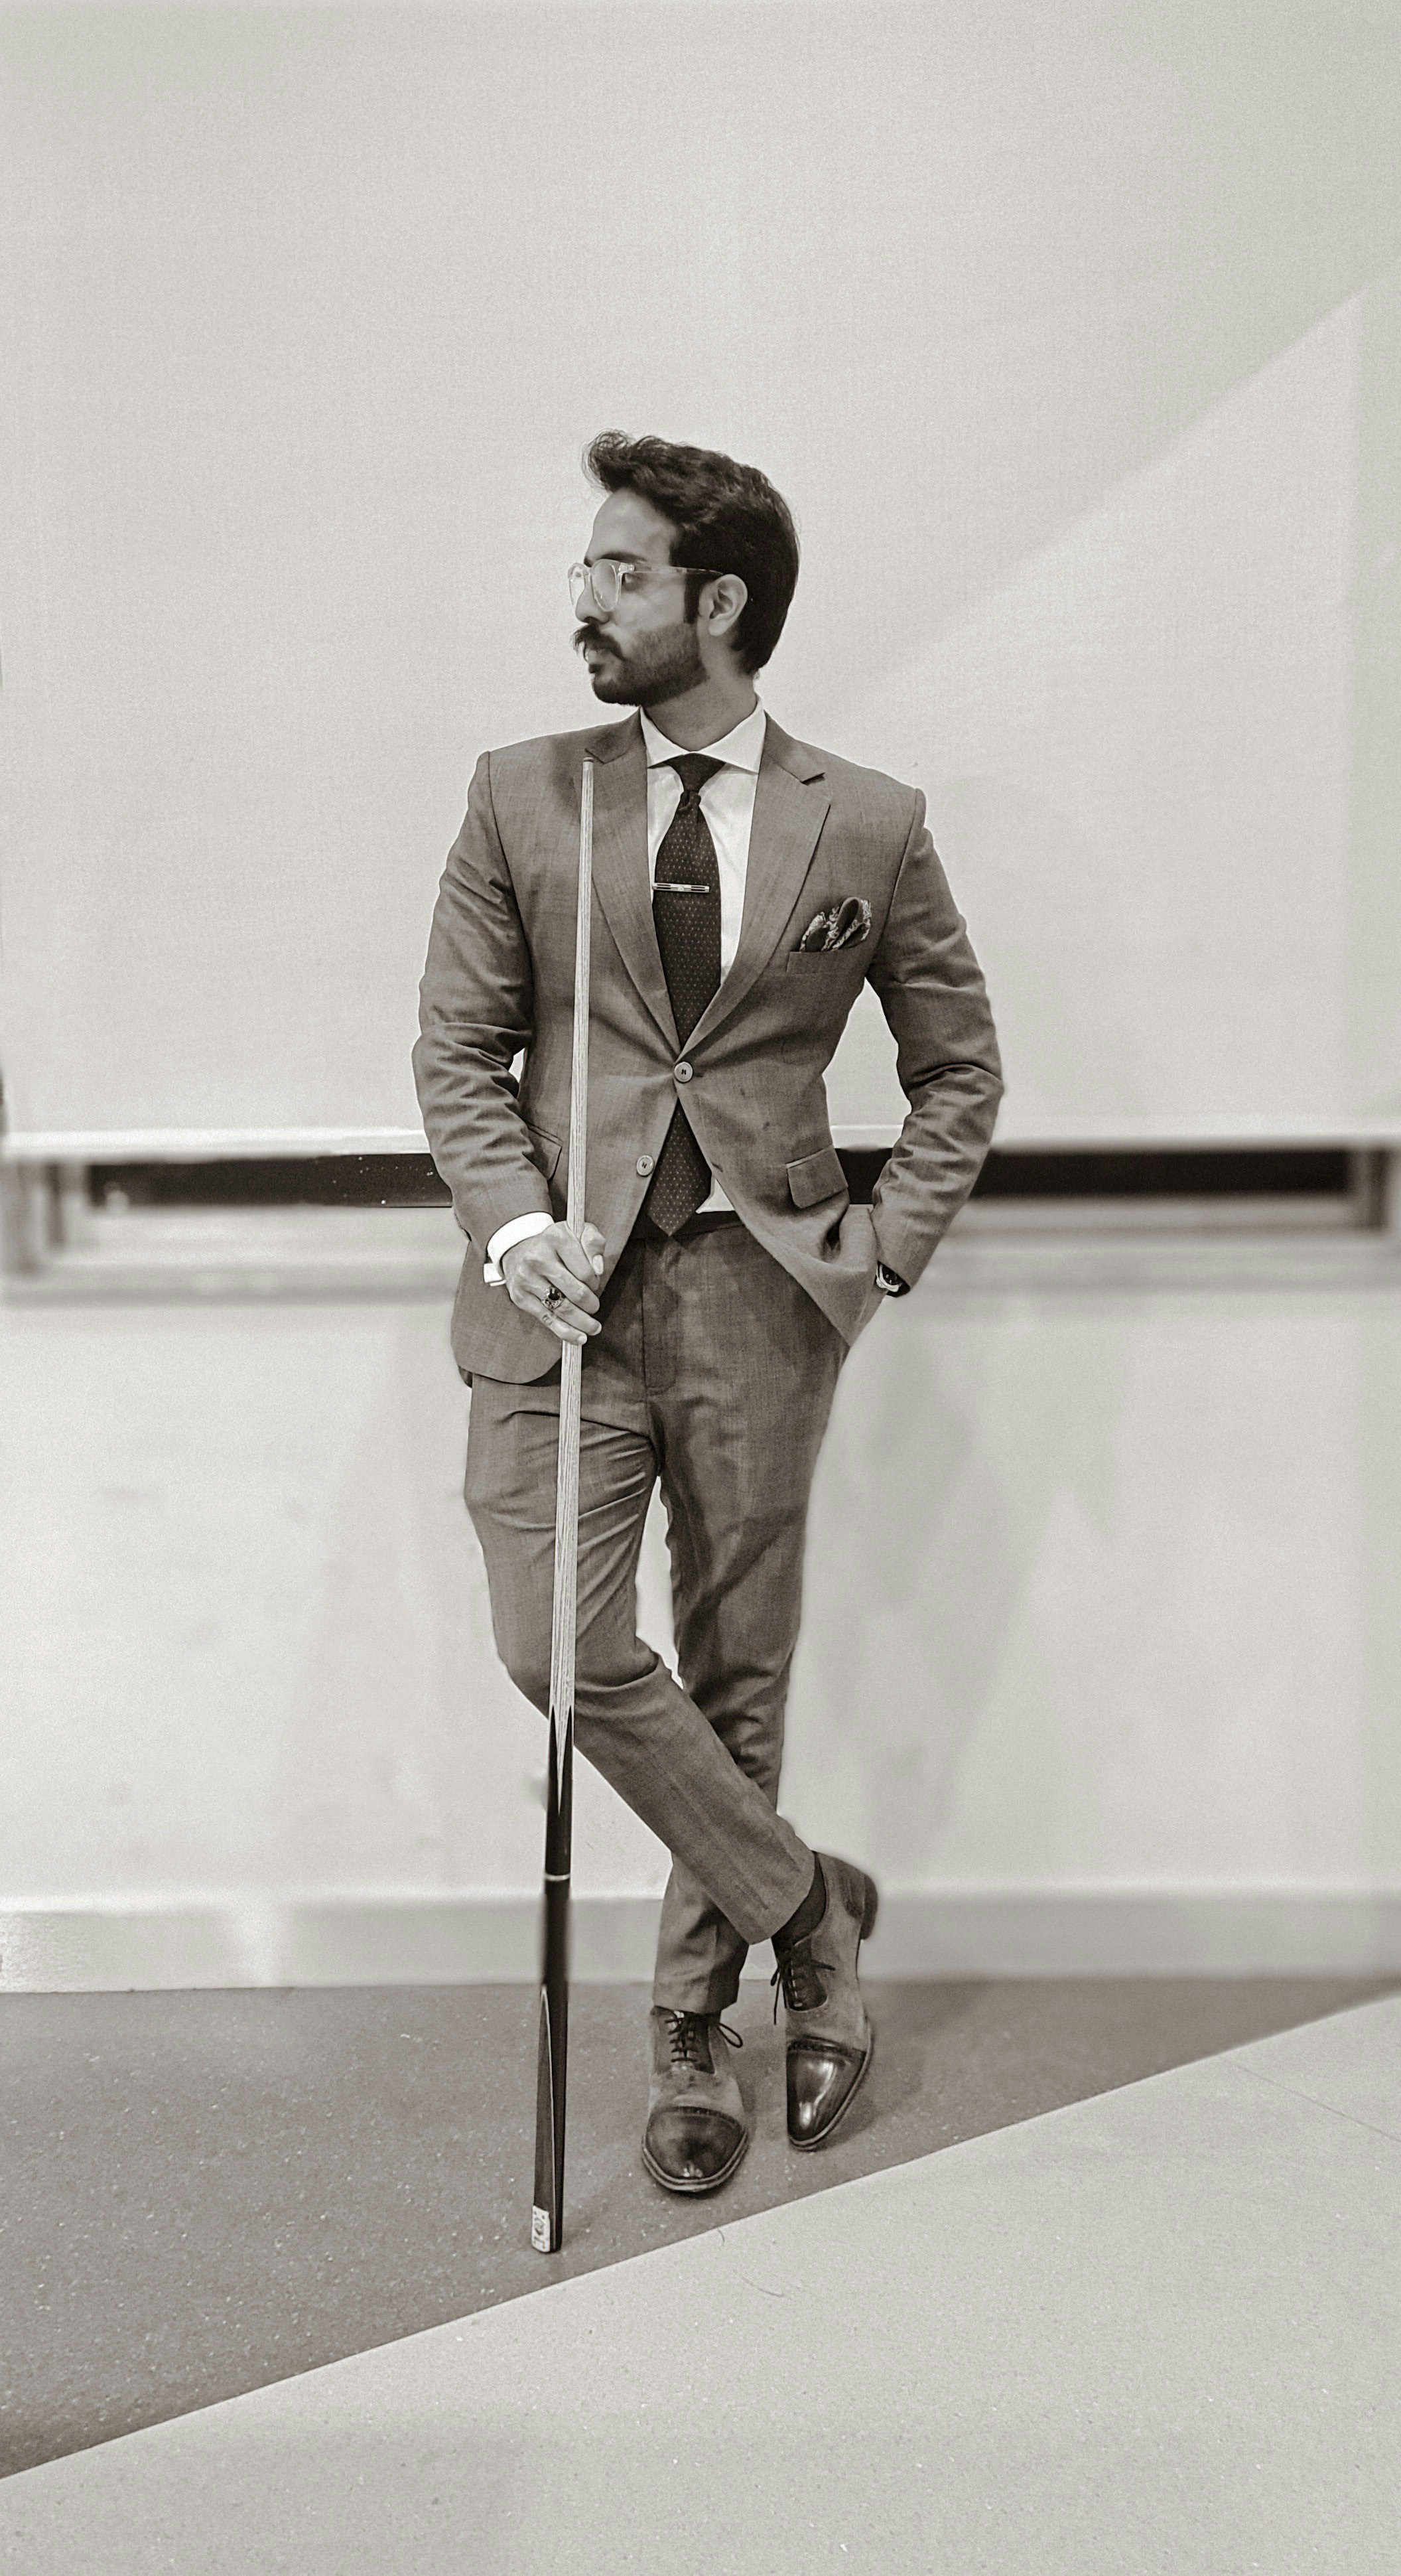 great photo recipe,how to photograph man in brown suit holding walking stick